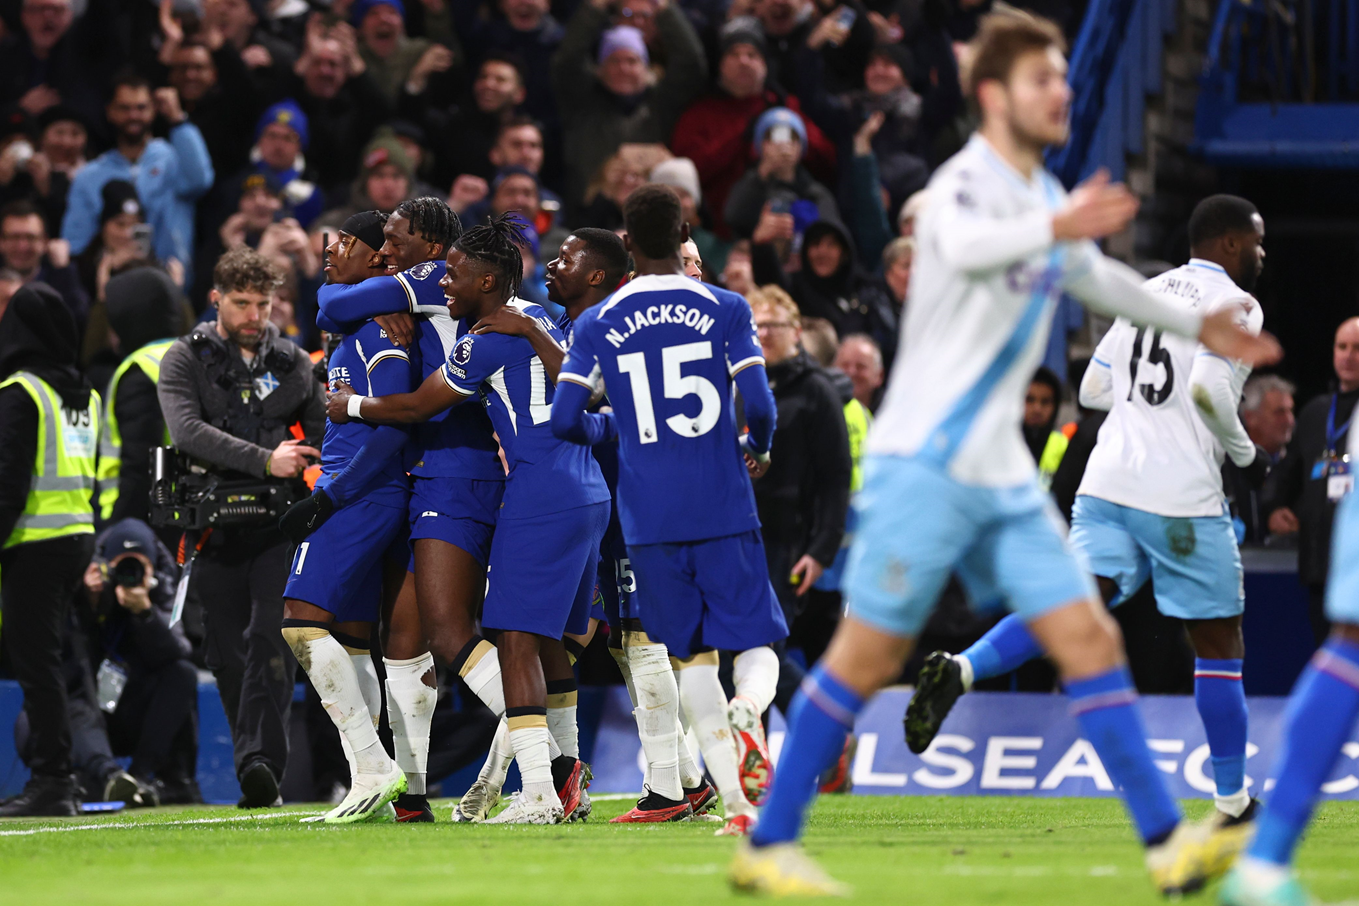 Noni Madueke celebrating his winner against Crystal Palace with his teammates.